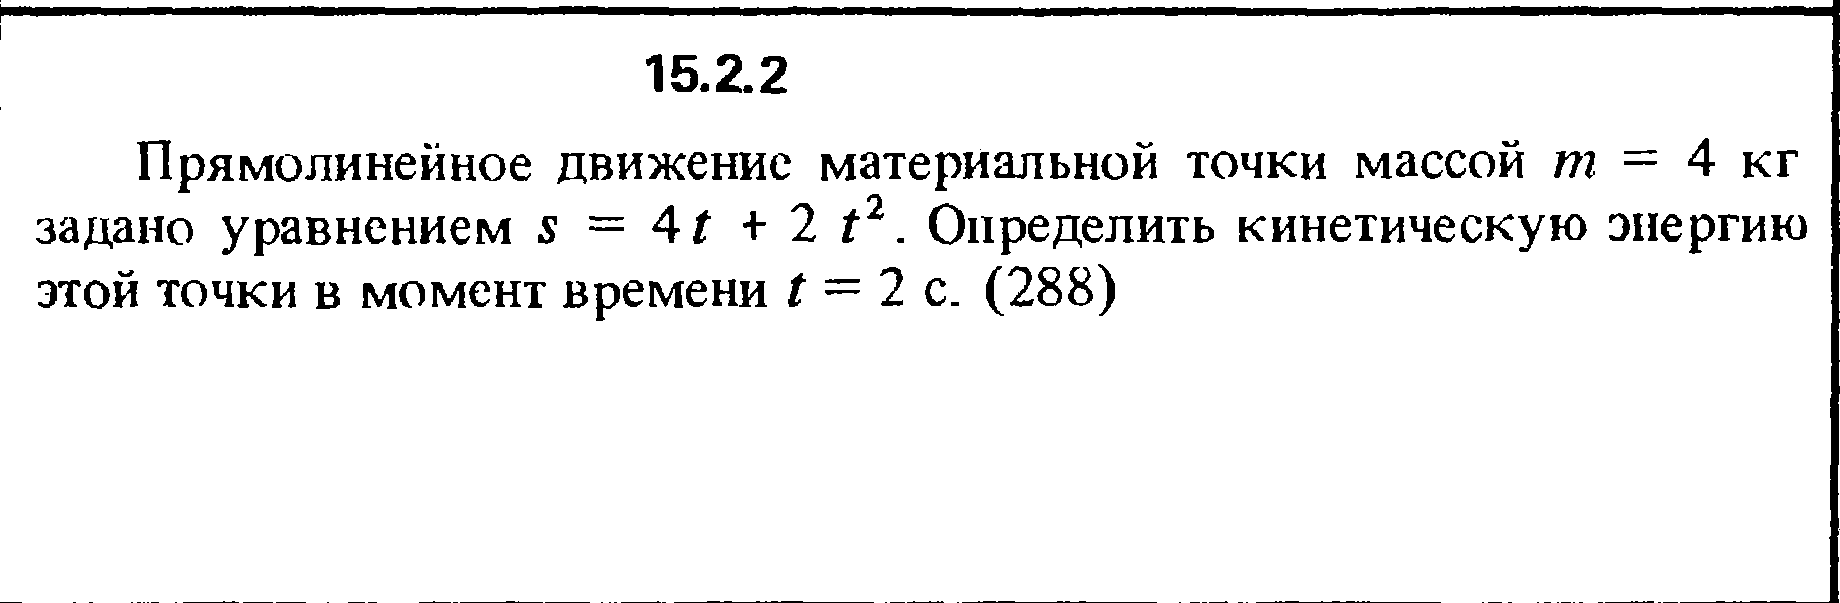 Solution 15.2.2 collection of Kep OE 1989